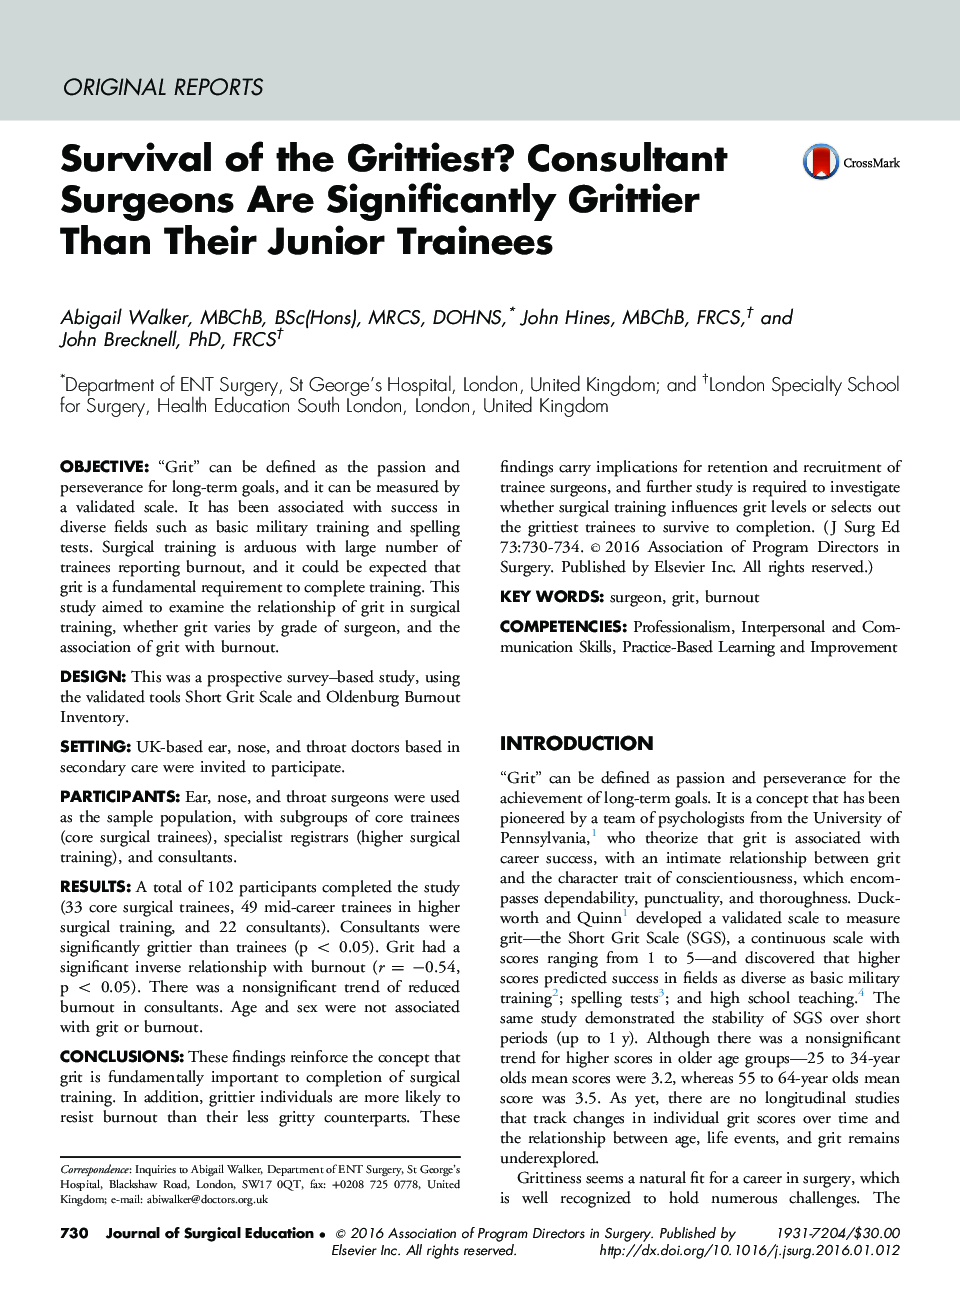 Survival of the Grittiest? Consultant Surgeons Are Significantly Grittier Than Their Junior Trainees